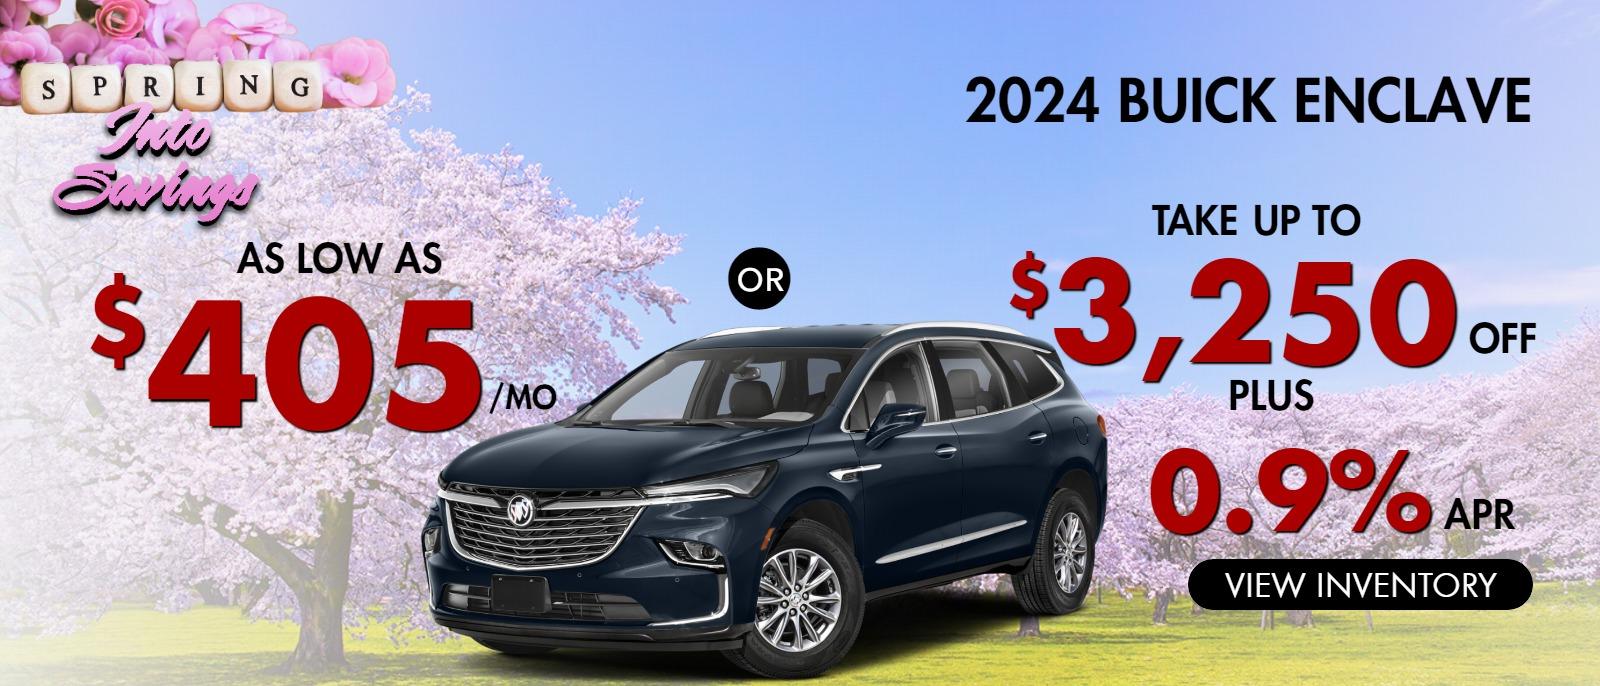 2024 Enclave
Stock B3560

take up to $3250 OFF
plus
0.9% finance
 OR AS LOW AS $405/mo